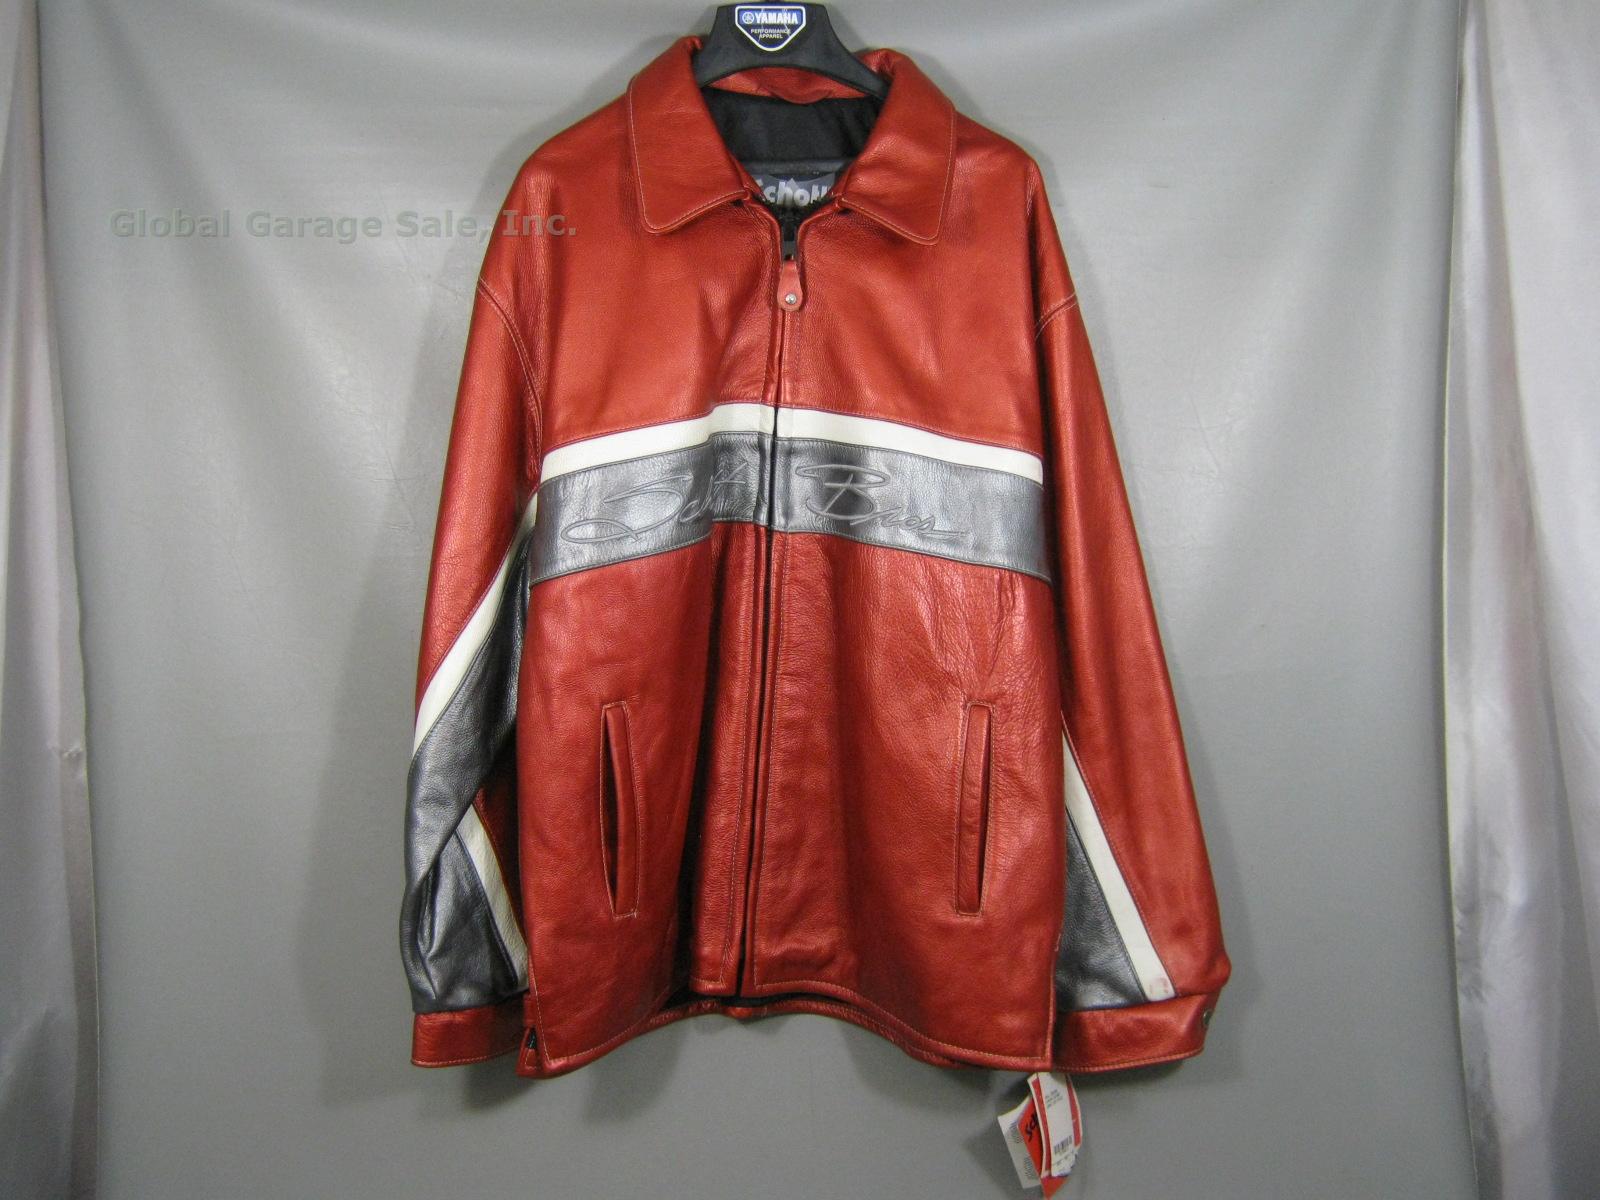 New Mens Schott MCMXIII 1913 Red Silver White Leather Motorcycle Jacket XXL 2XL